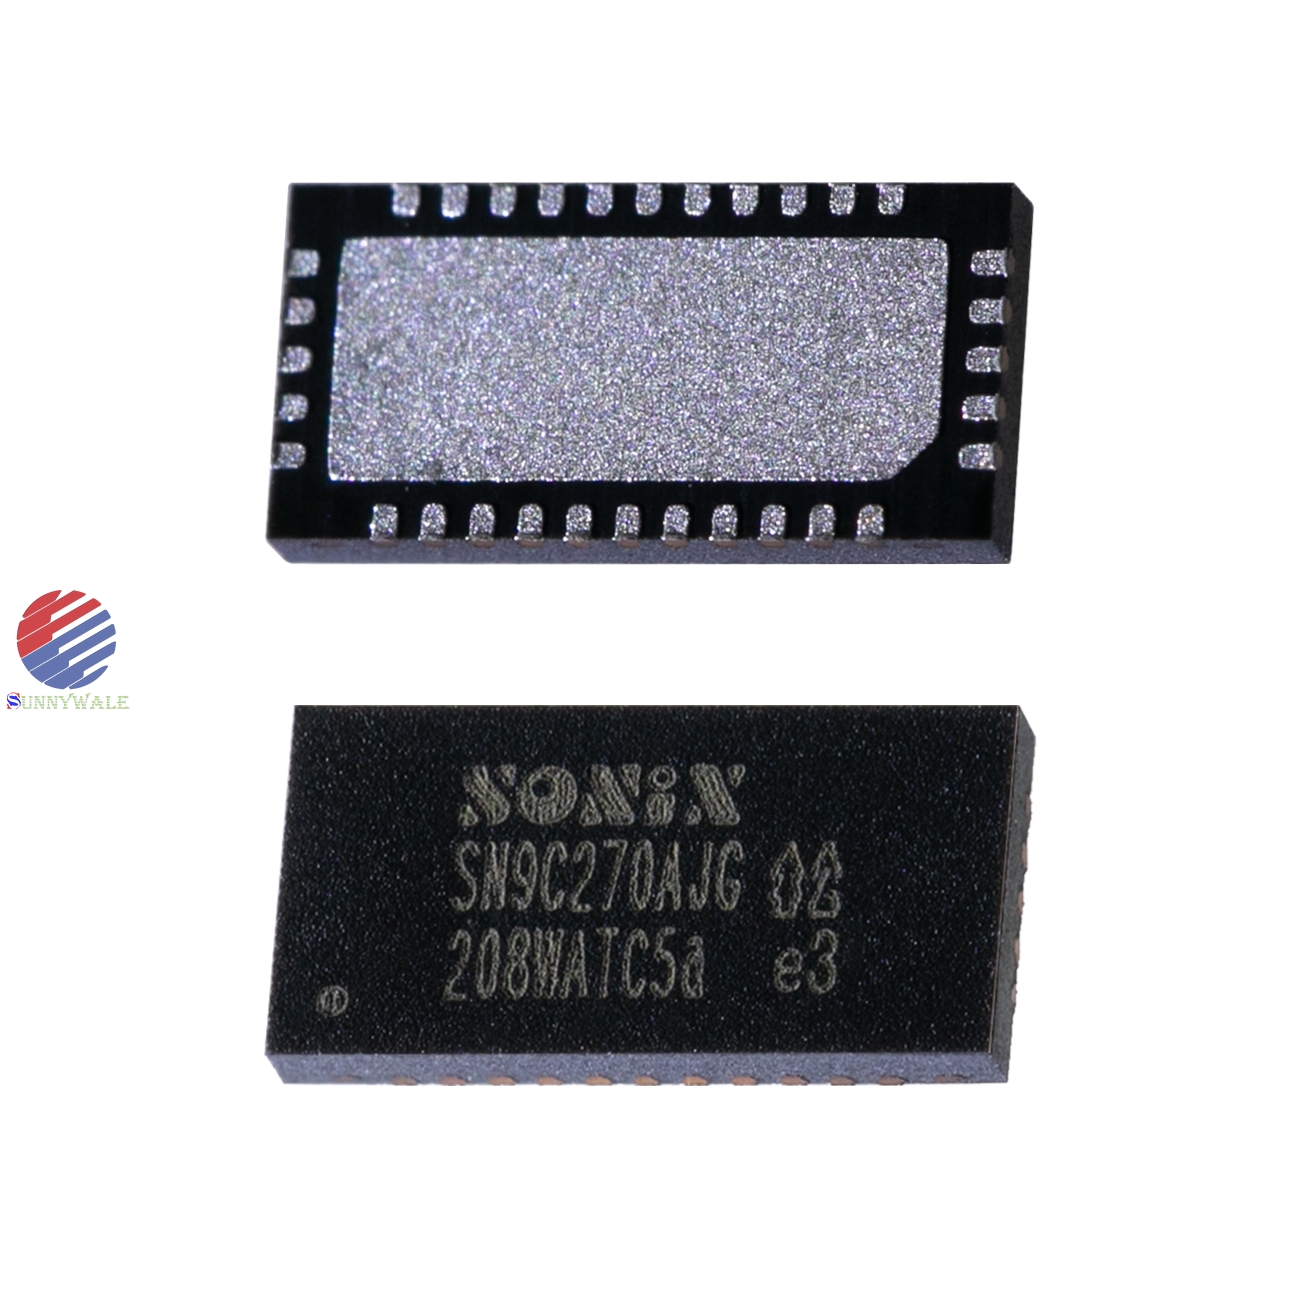 SN9C270AJG, the old version of ZX302AJG, USB 2.0 video PC camera controller IC, Sonix camera DSP, fully compatible with ZX302AJG, support SXGA(1280*1024P) image sensor ISP